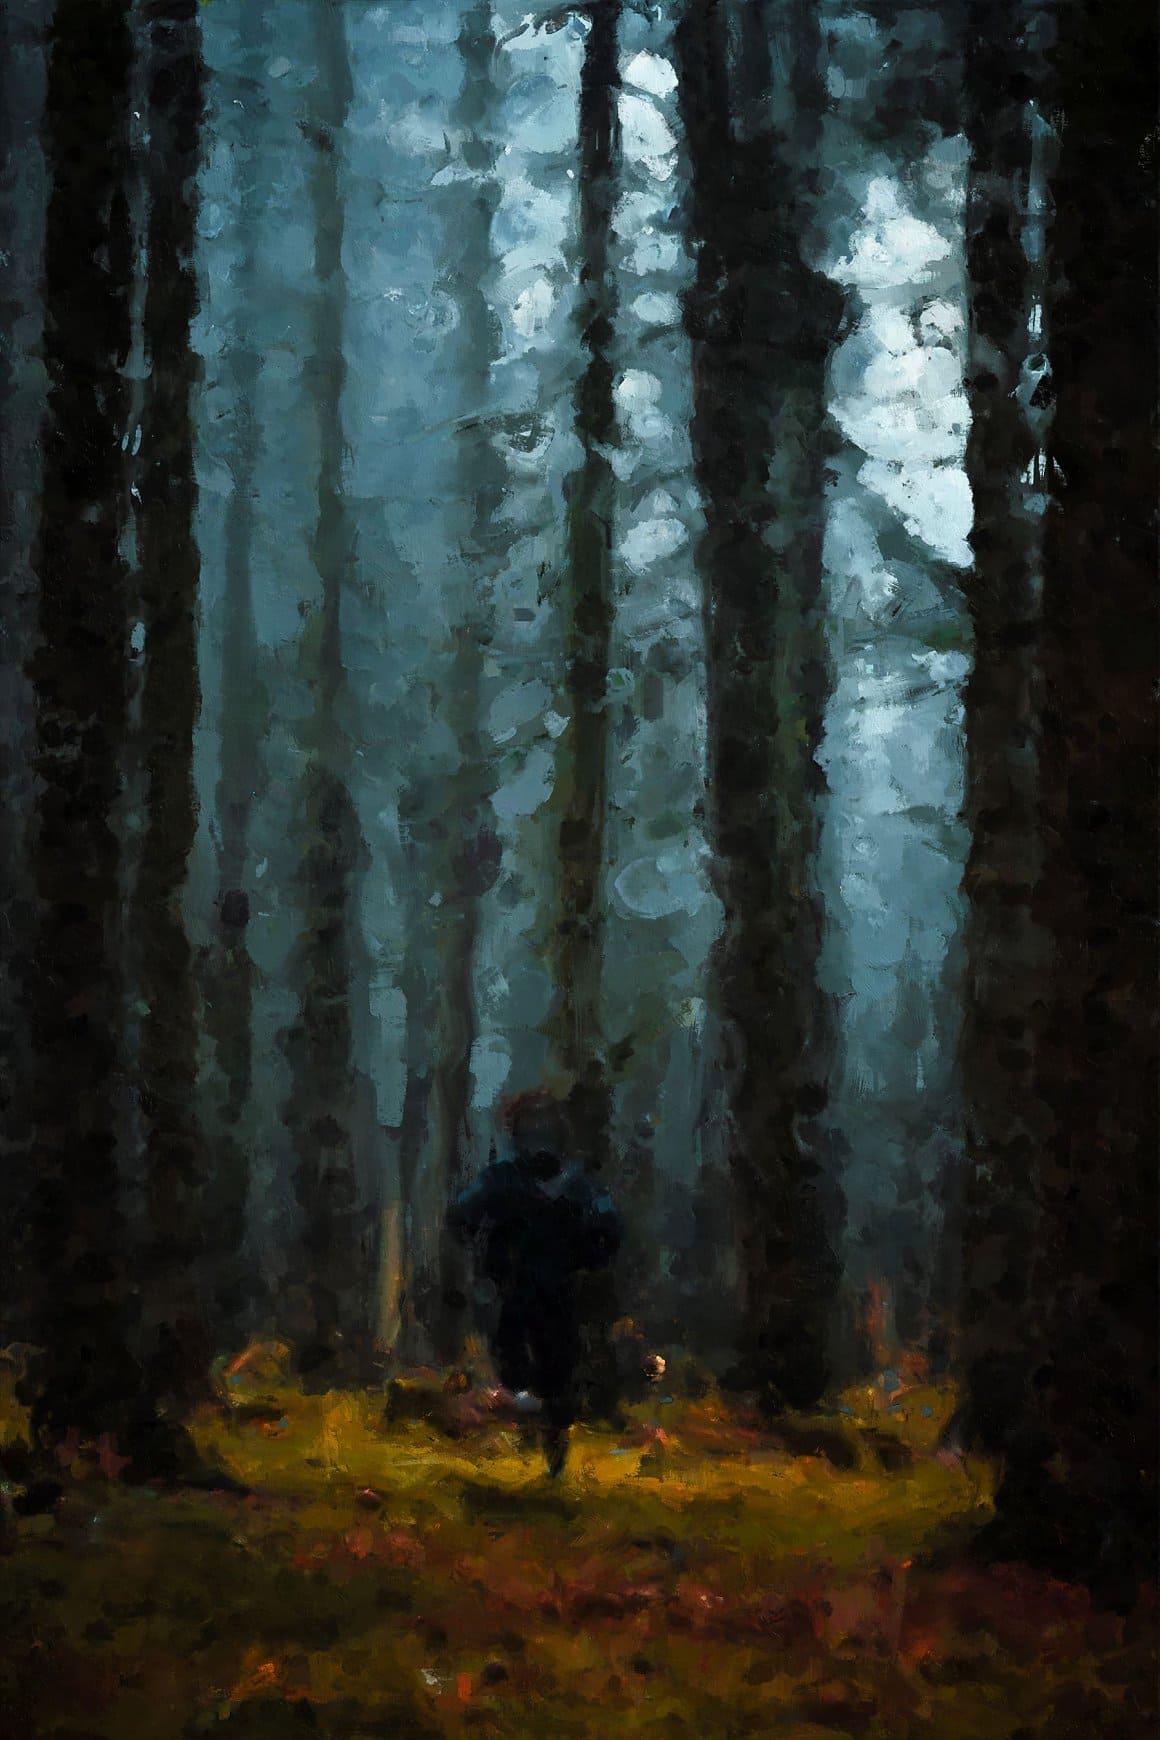 Image of a boy riding a bicycle in the forest using Painted Photoshop Effect.